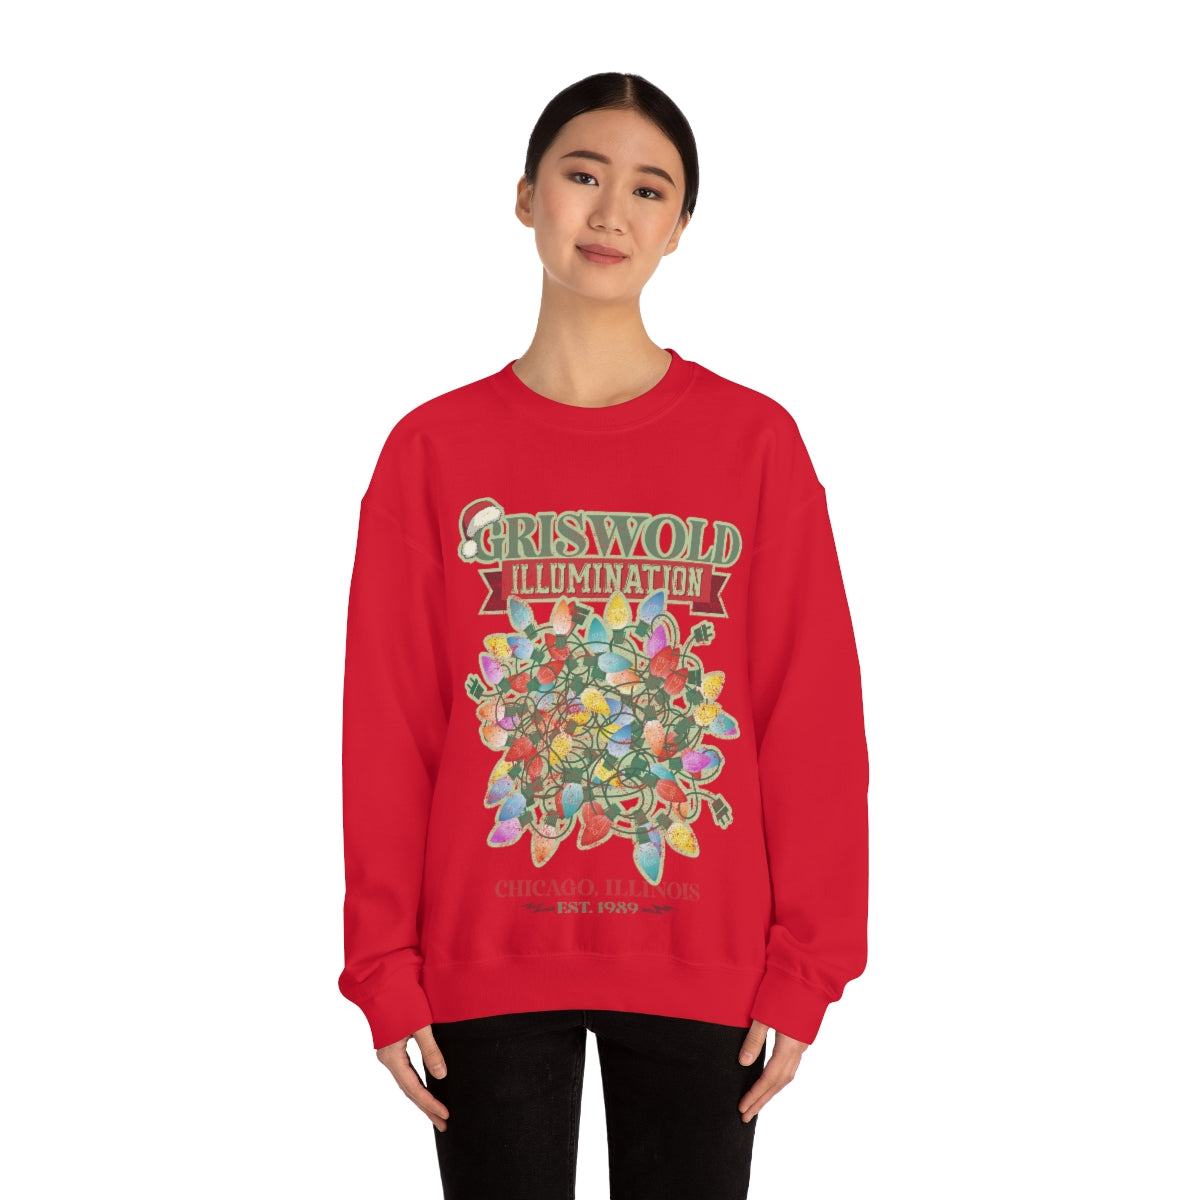 Griswold Illuminations Unisex Heavy Blend™ Crewneck Sweatshirt Griswold Electric Christmas Vacation